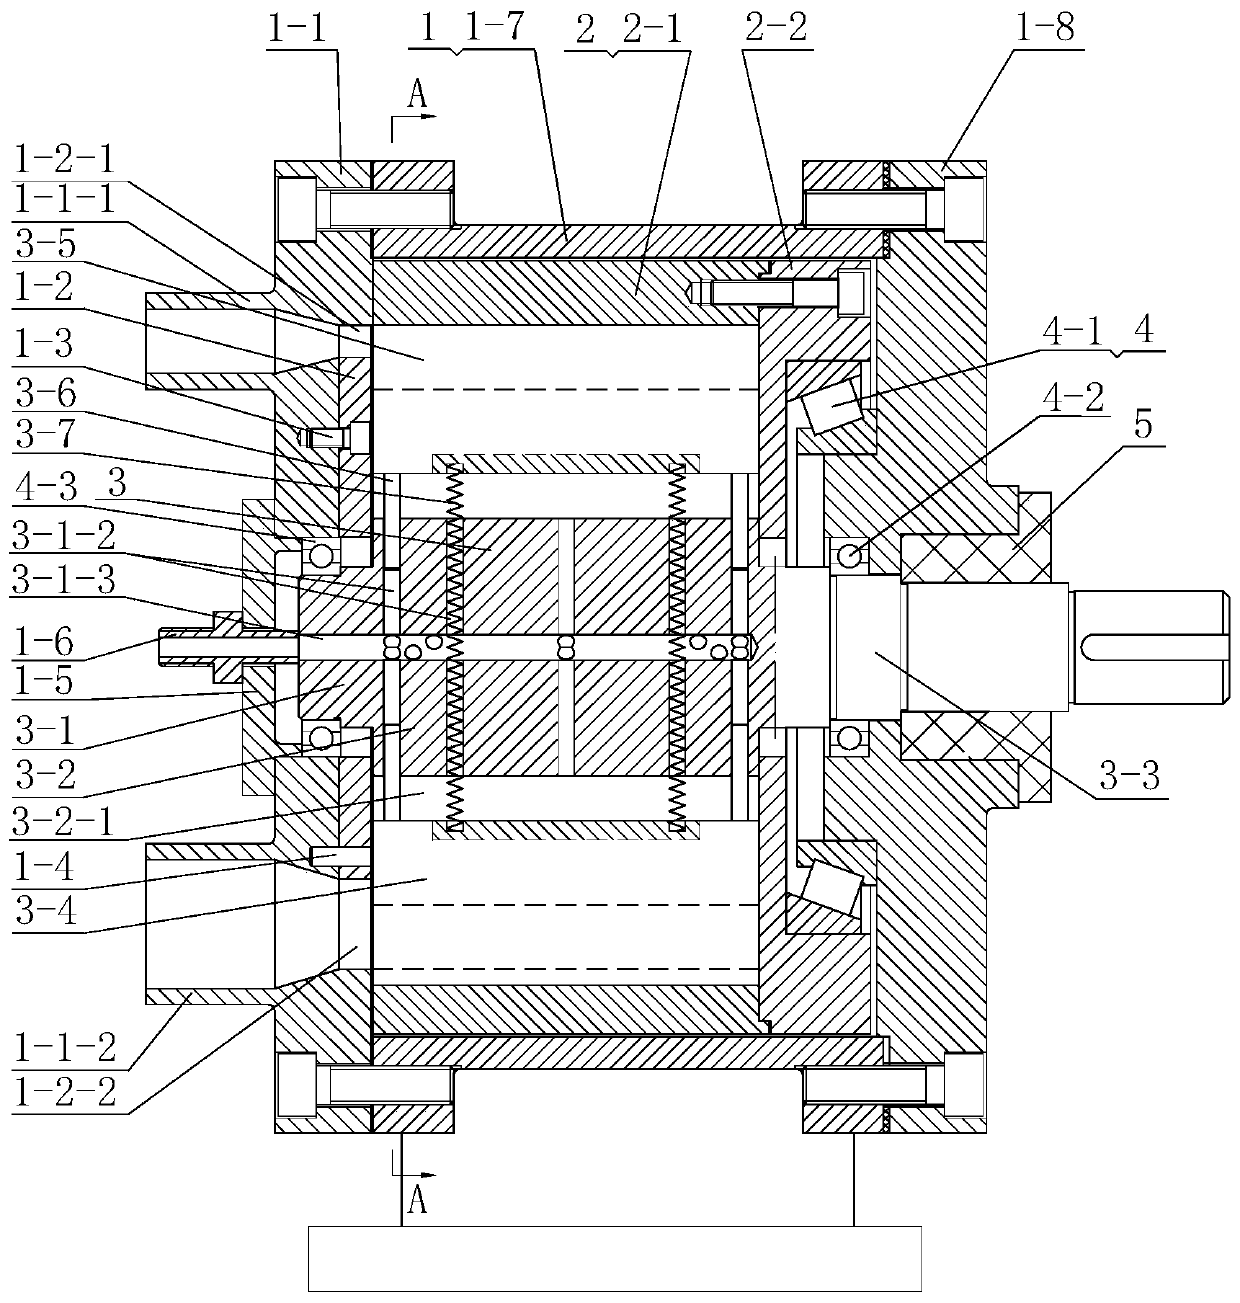 Sliding vane expander comprising cylinder rotated with rotor